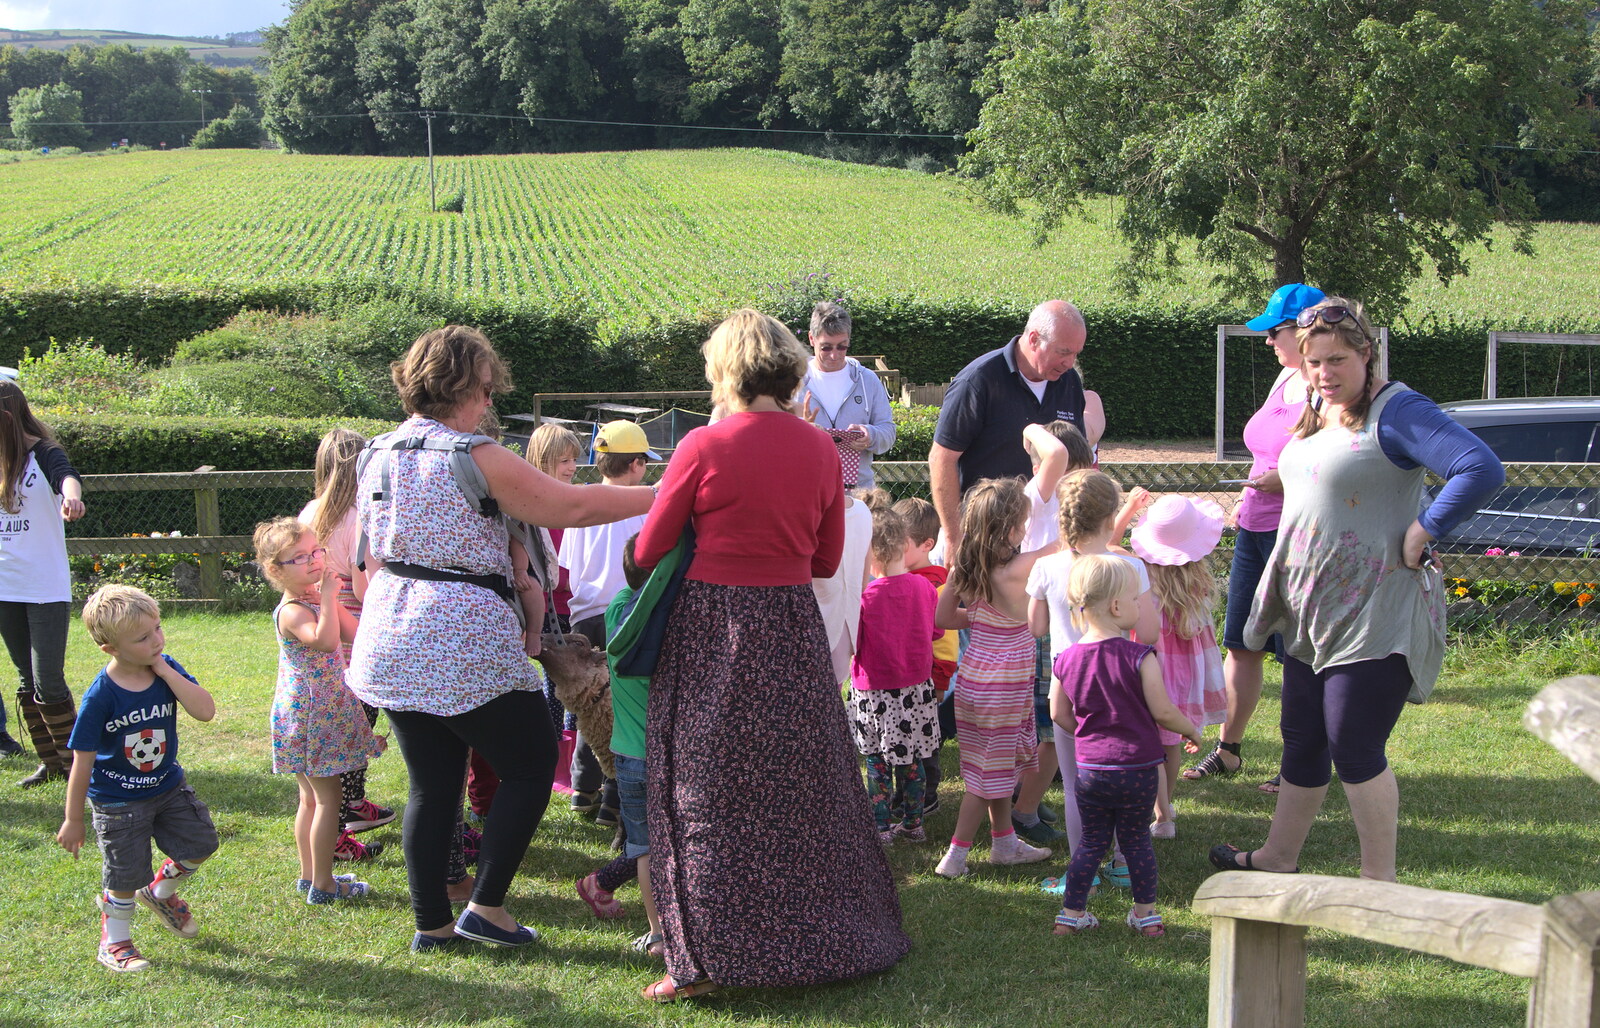 There's a gathering ina field from Camping With Sean, Ashburton, Devon - 8th August 2016